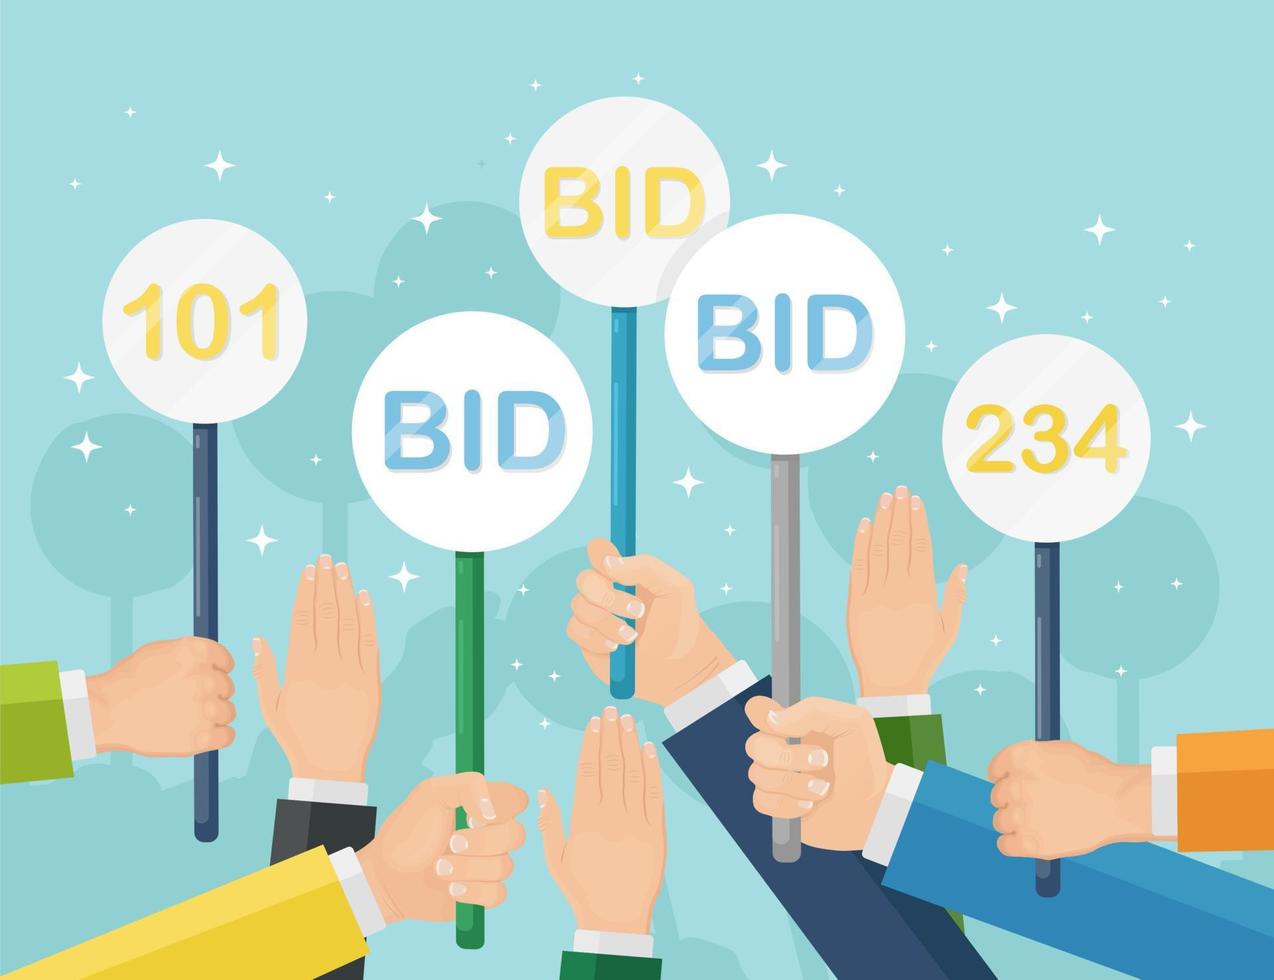 Businessman hold auction paddle in hand. Bidding, auction competition concept. People rise signs with BID inscriptions. Business trade process. Vector design